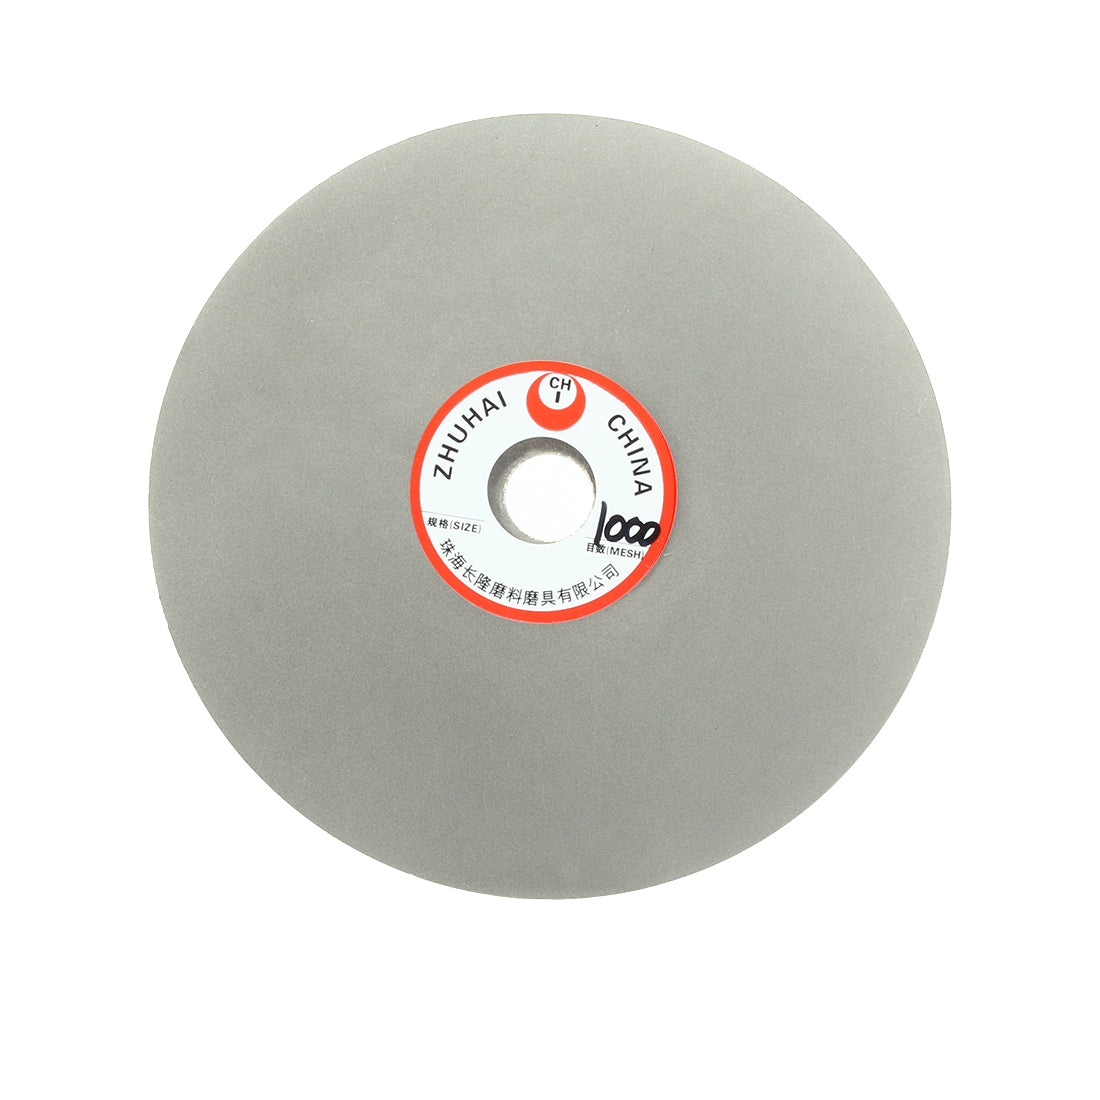 uxcell Uxcell 6-inch Diamond Coated Flat Lap Wheel Grinding Sanding Polishing Disc